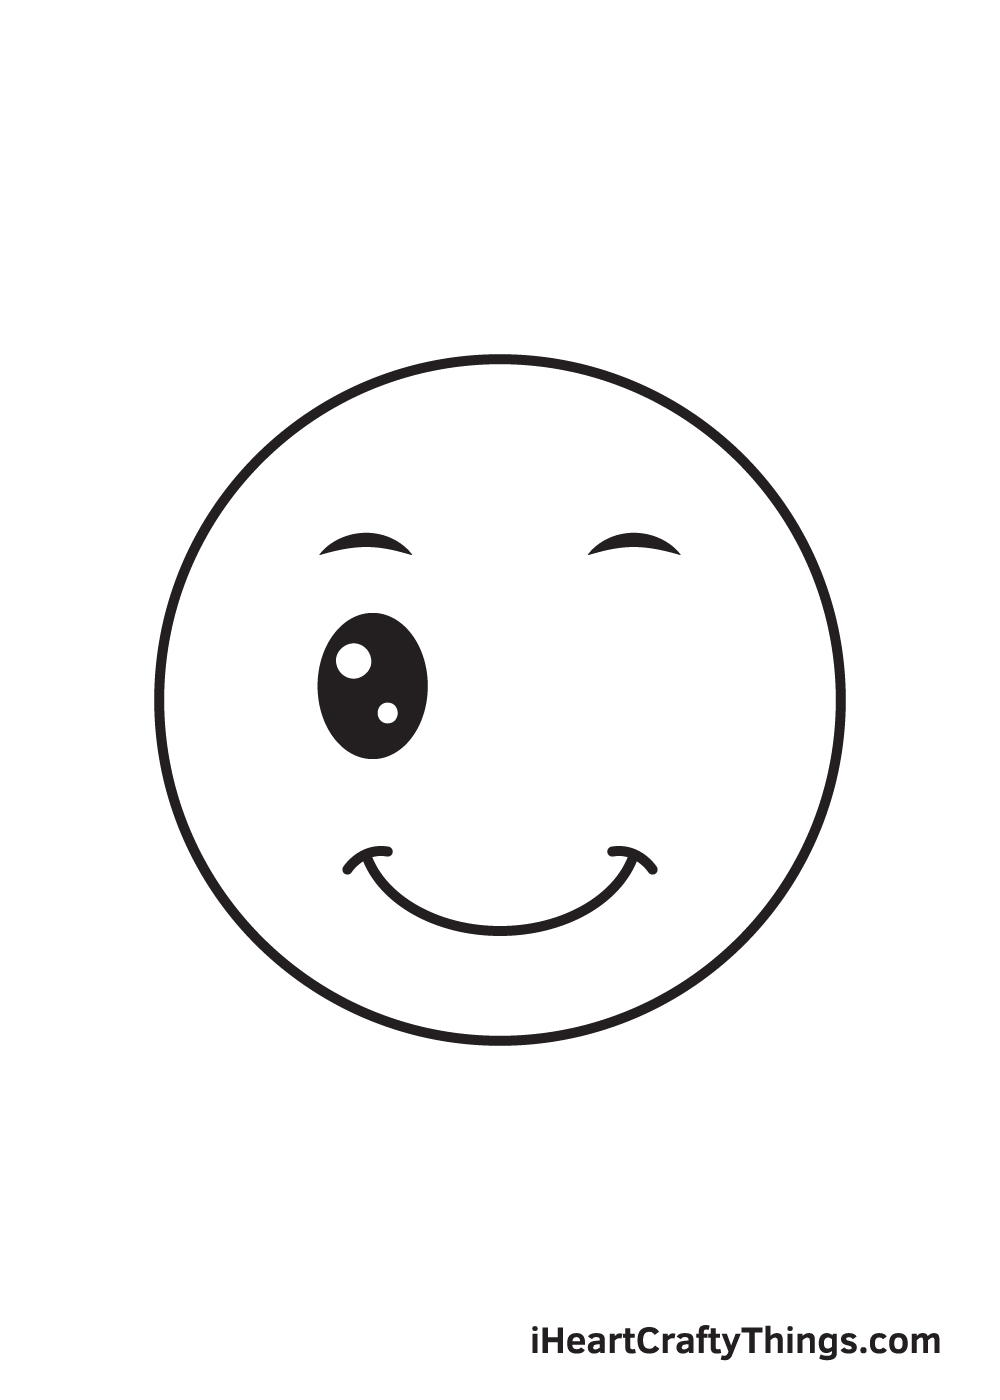 3d Smiley: Over 31,542 Royalty-Free Licensable Stock Illustrations &  Drawings | Shutterstock